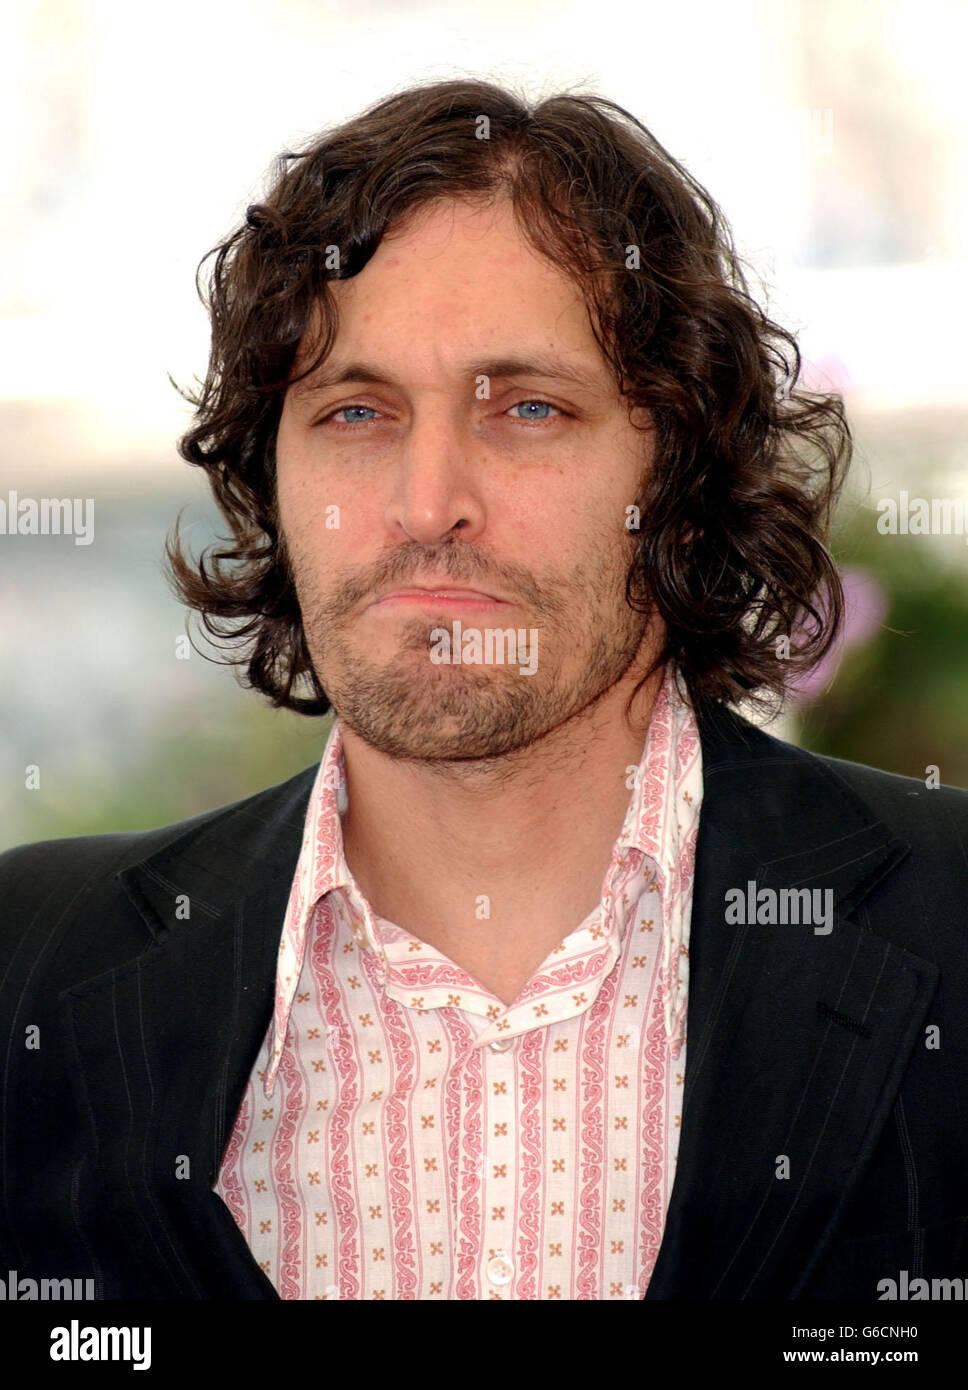 Vincent Gallo High Resolution Stock Photography and Images - Alamy